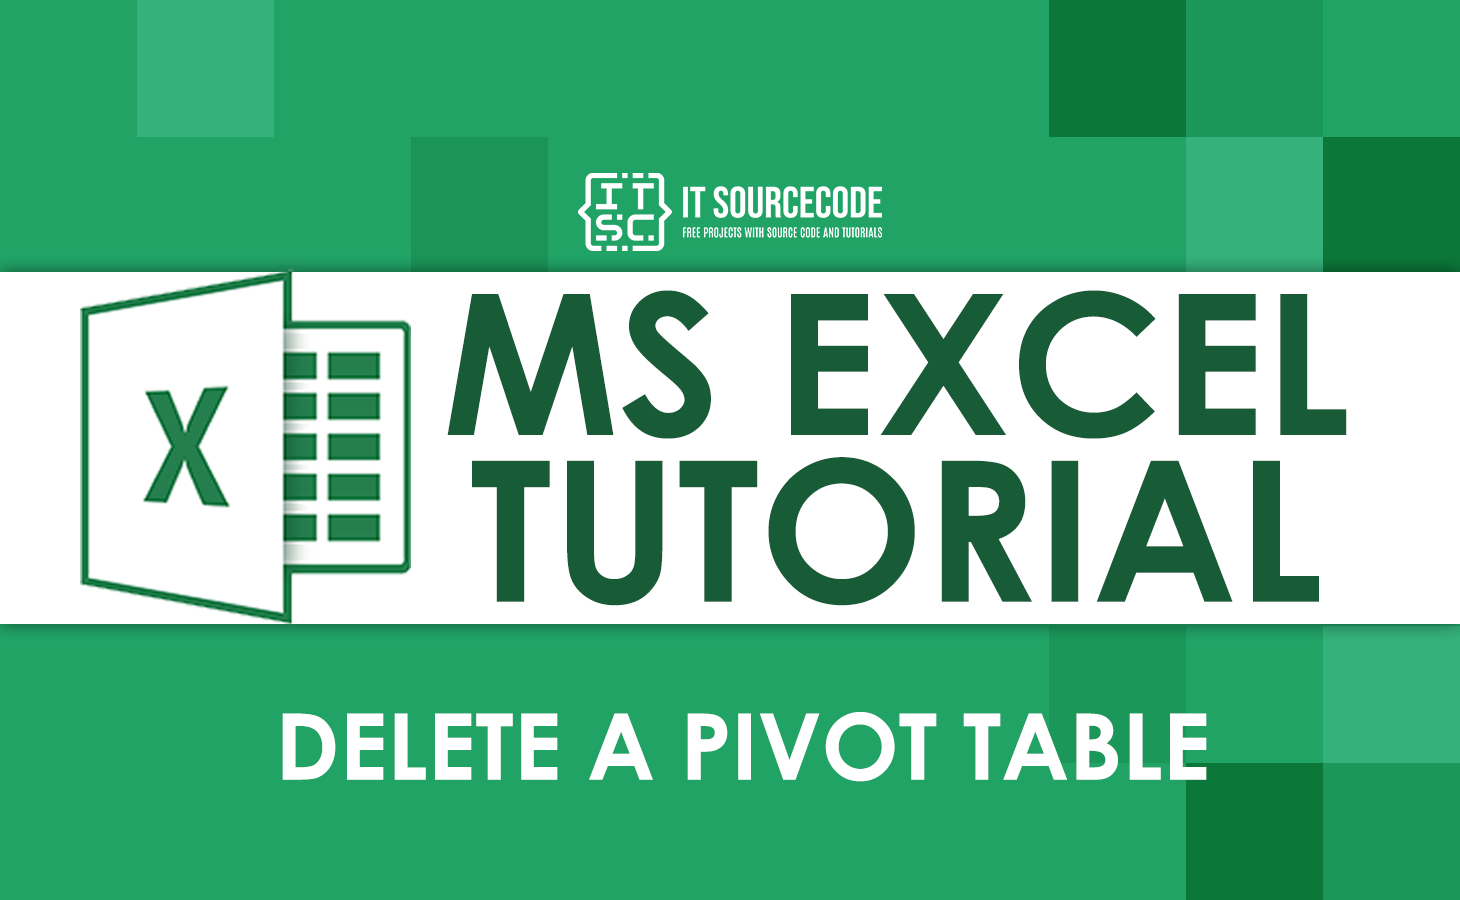 How To Delete A Pivot Table In Excel Easily